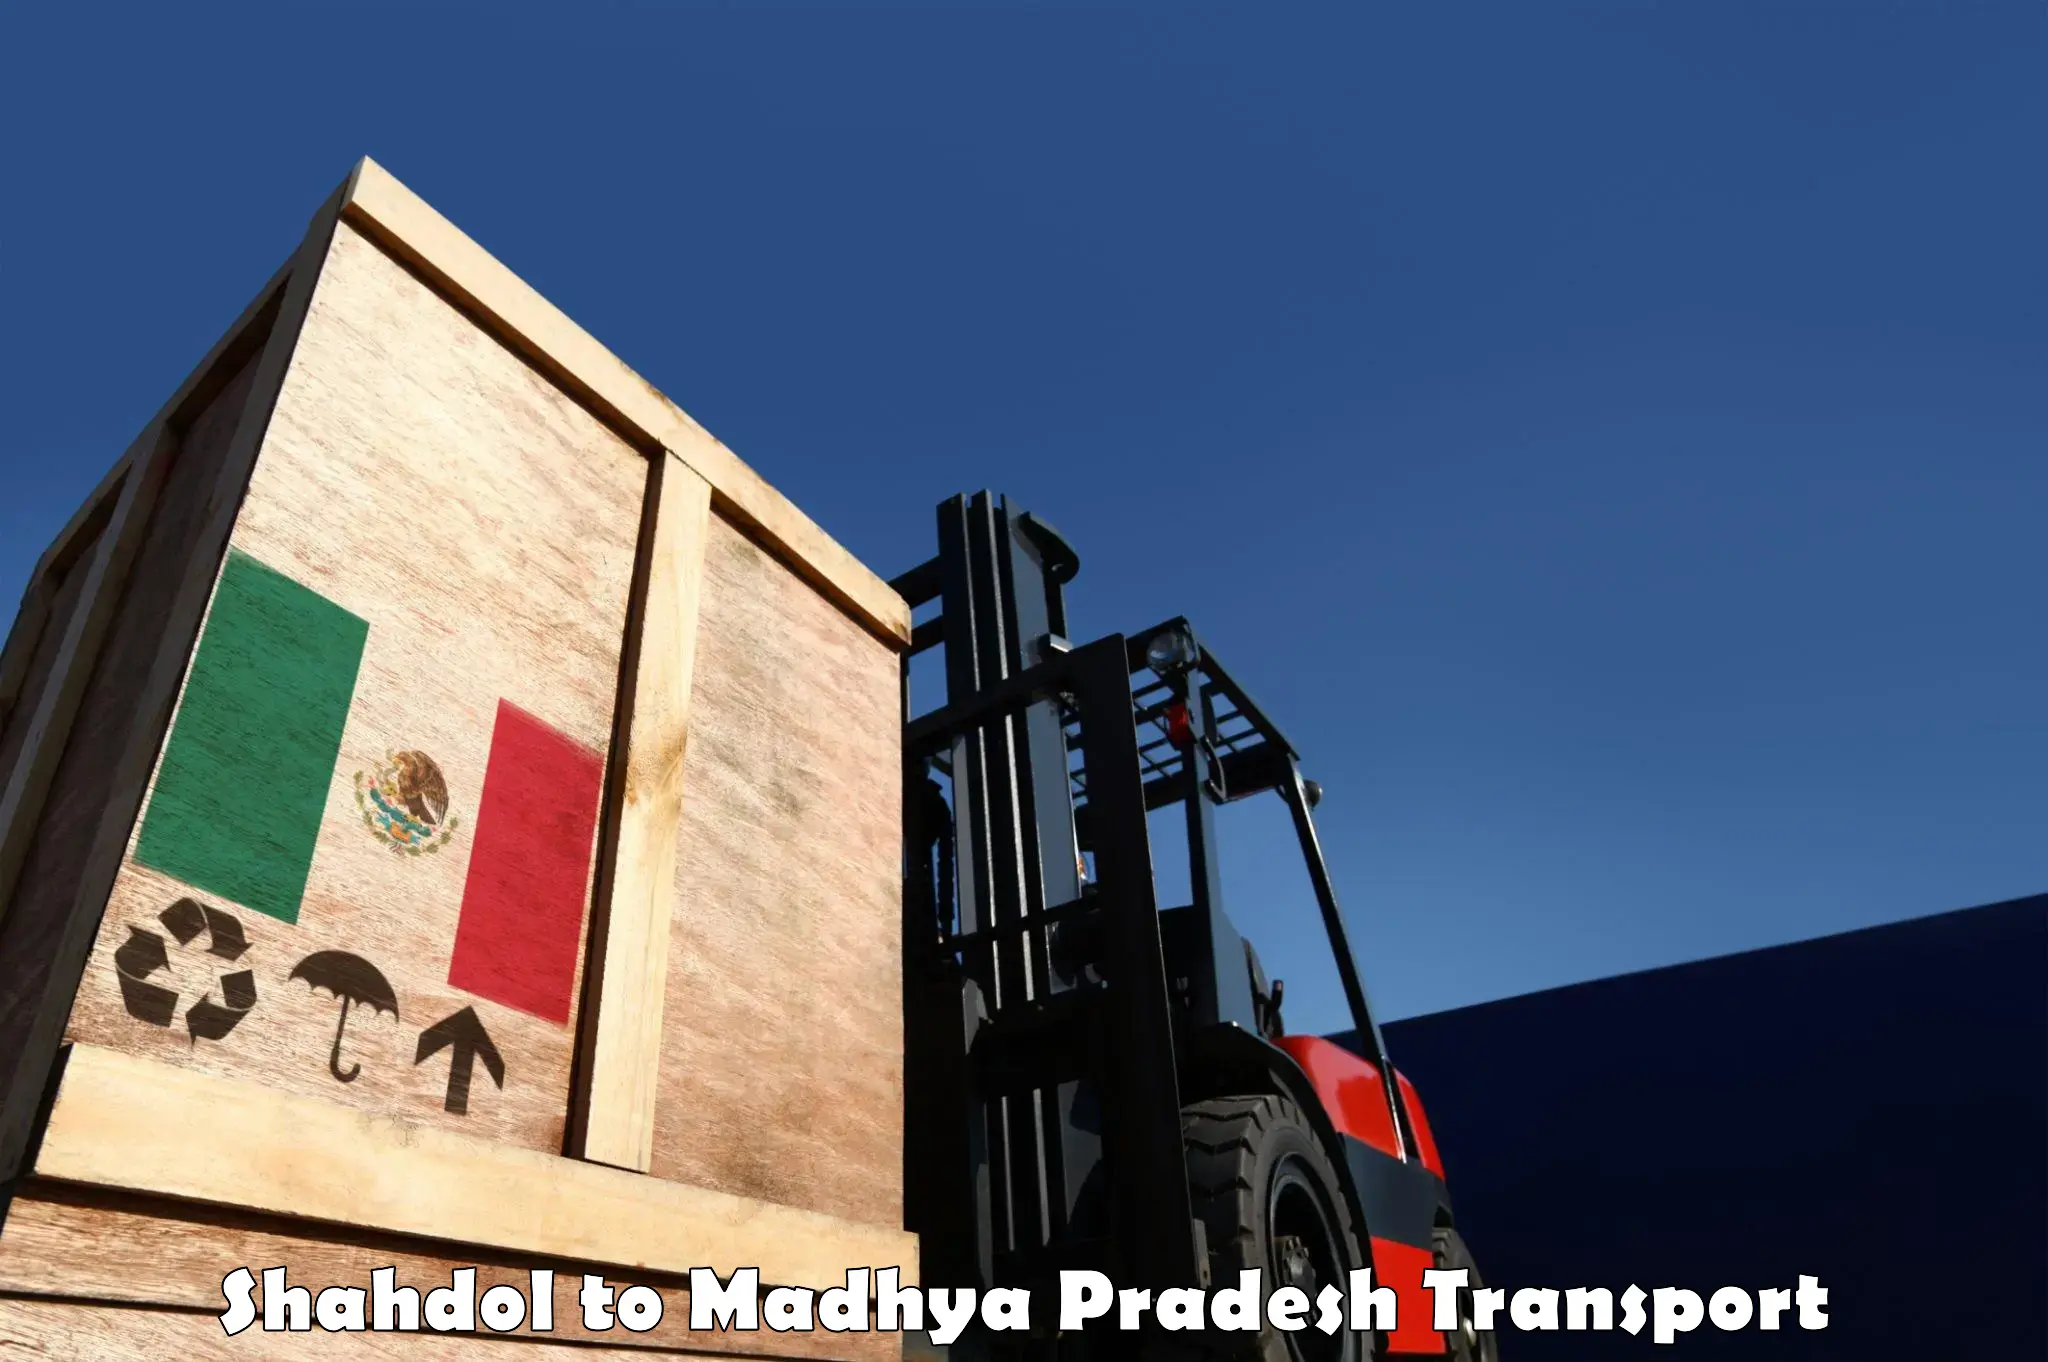 Daily transport service Shahdol to Chapda